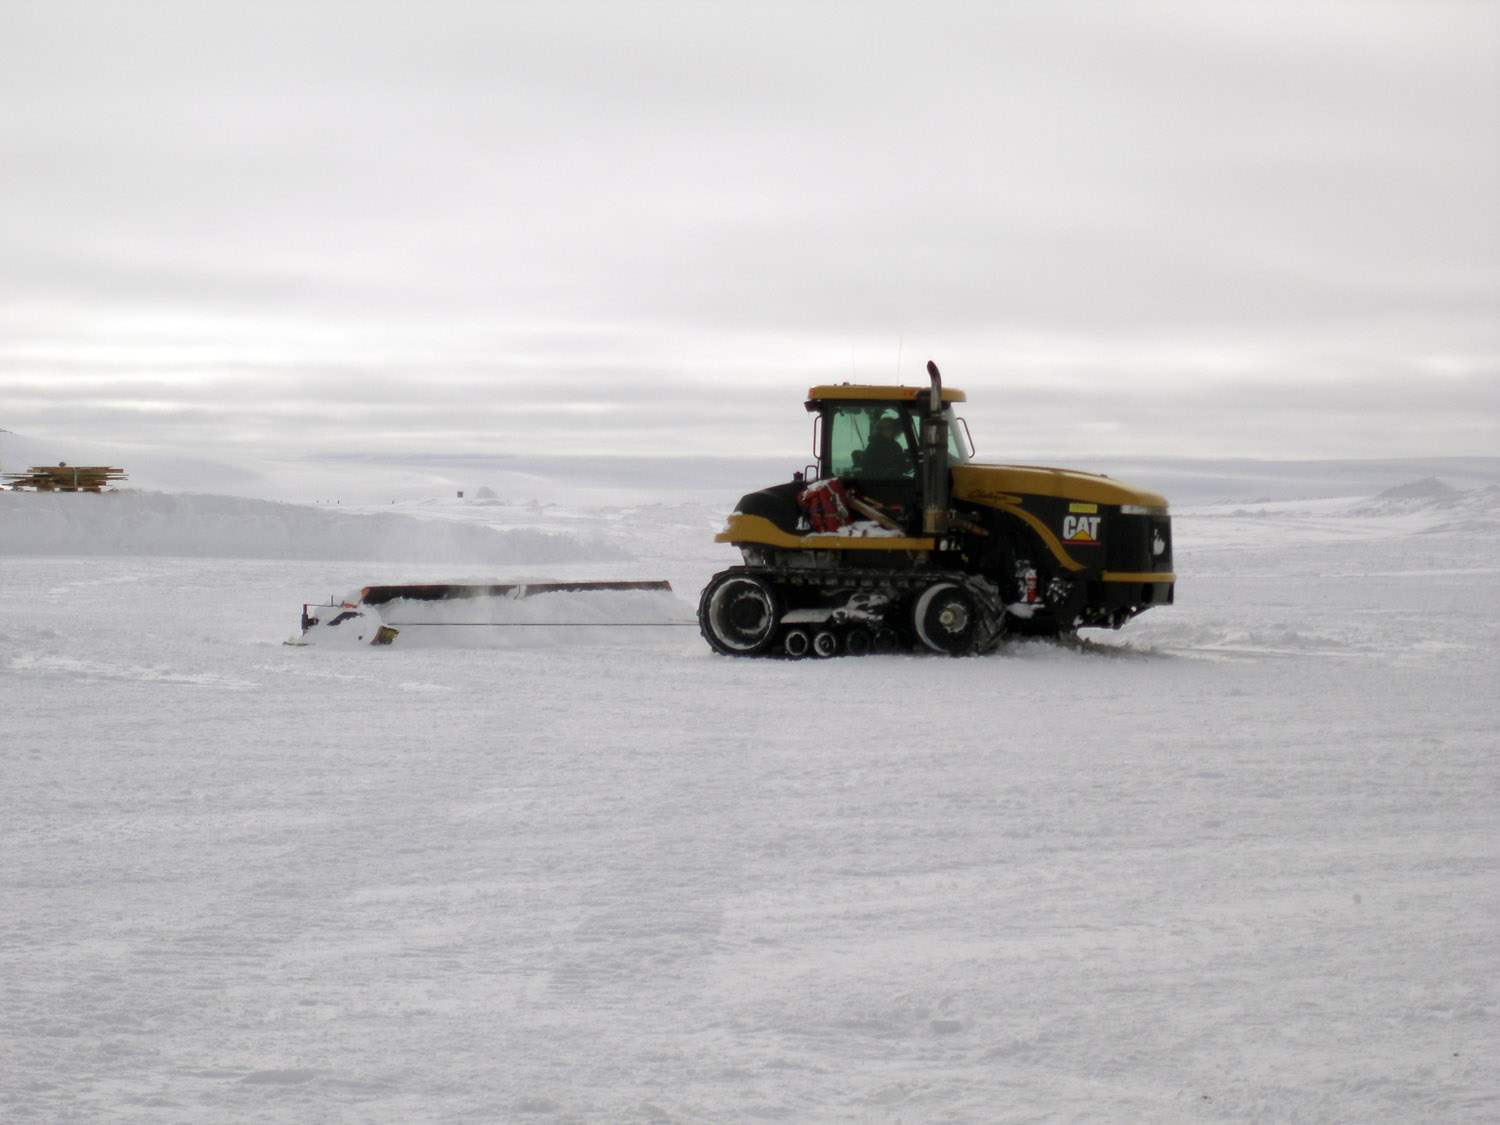 Vehicles - Smoothing the Snow at the South Pole